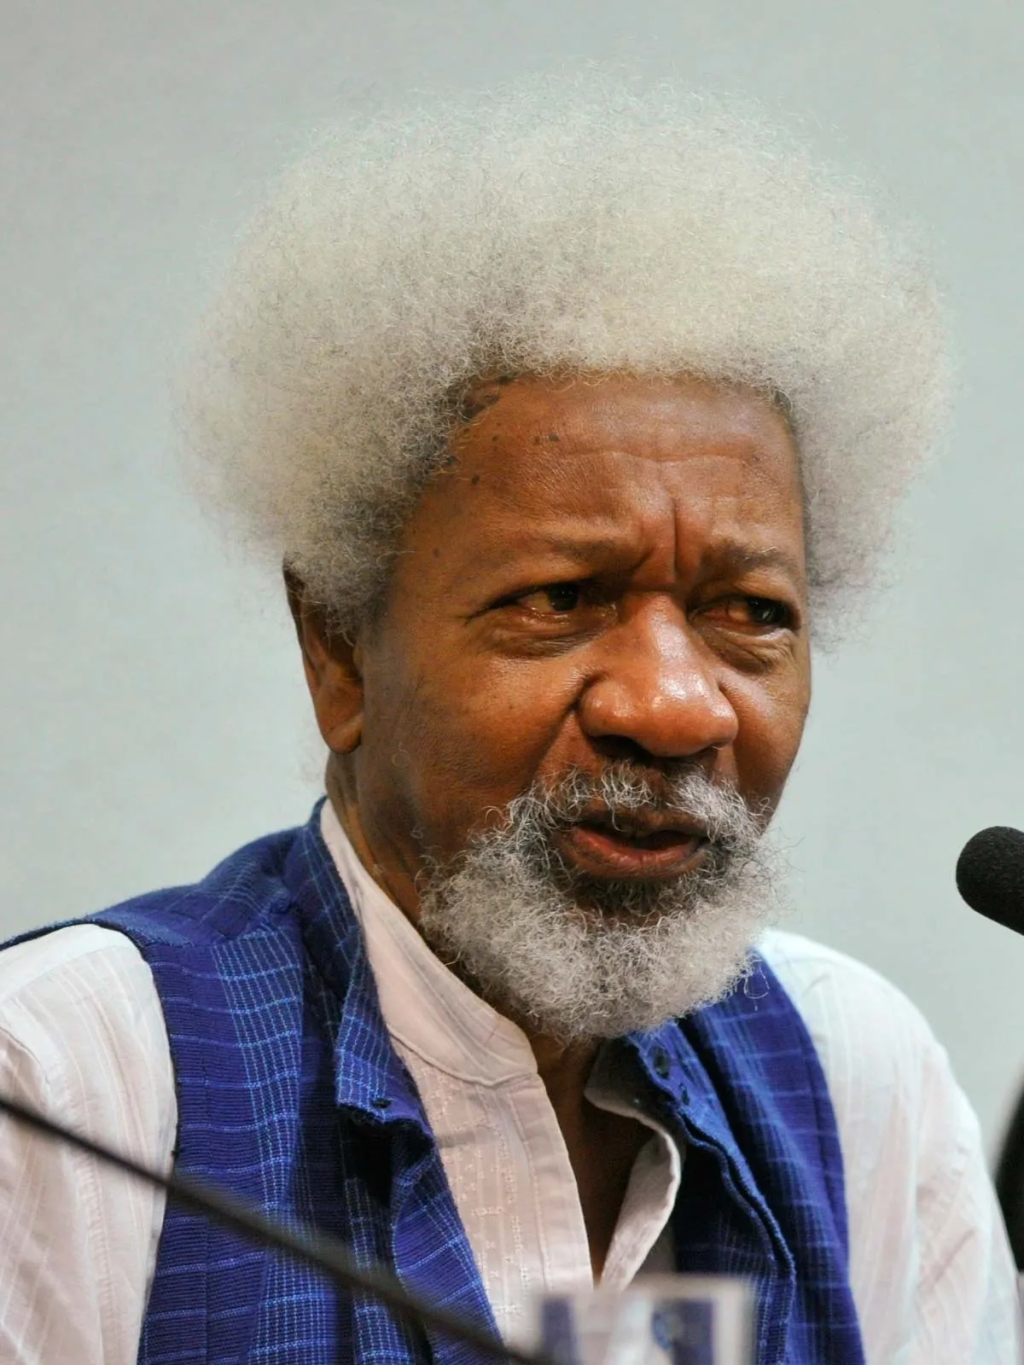 Analyzing Professor Wole Soyinka’s Comment on Peter Obi’s Competence: A Critical Perspective